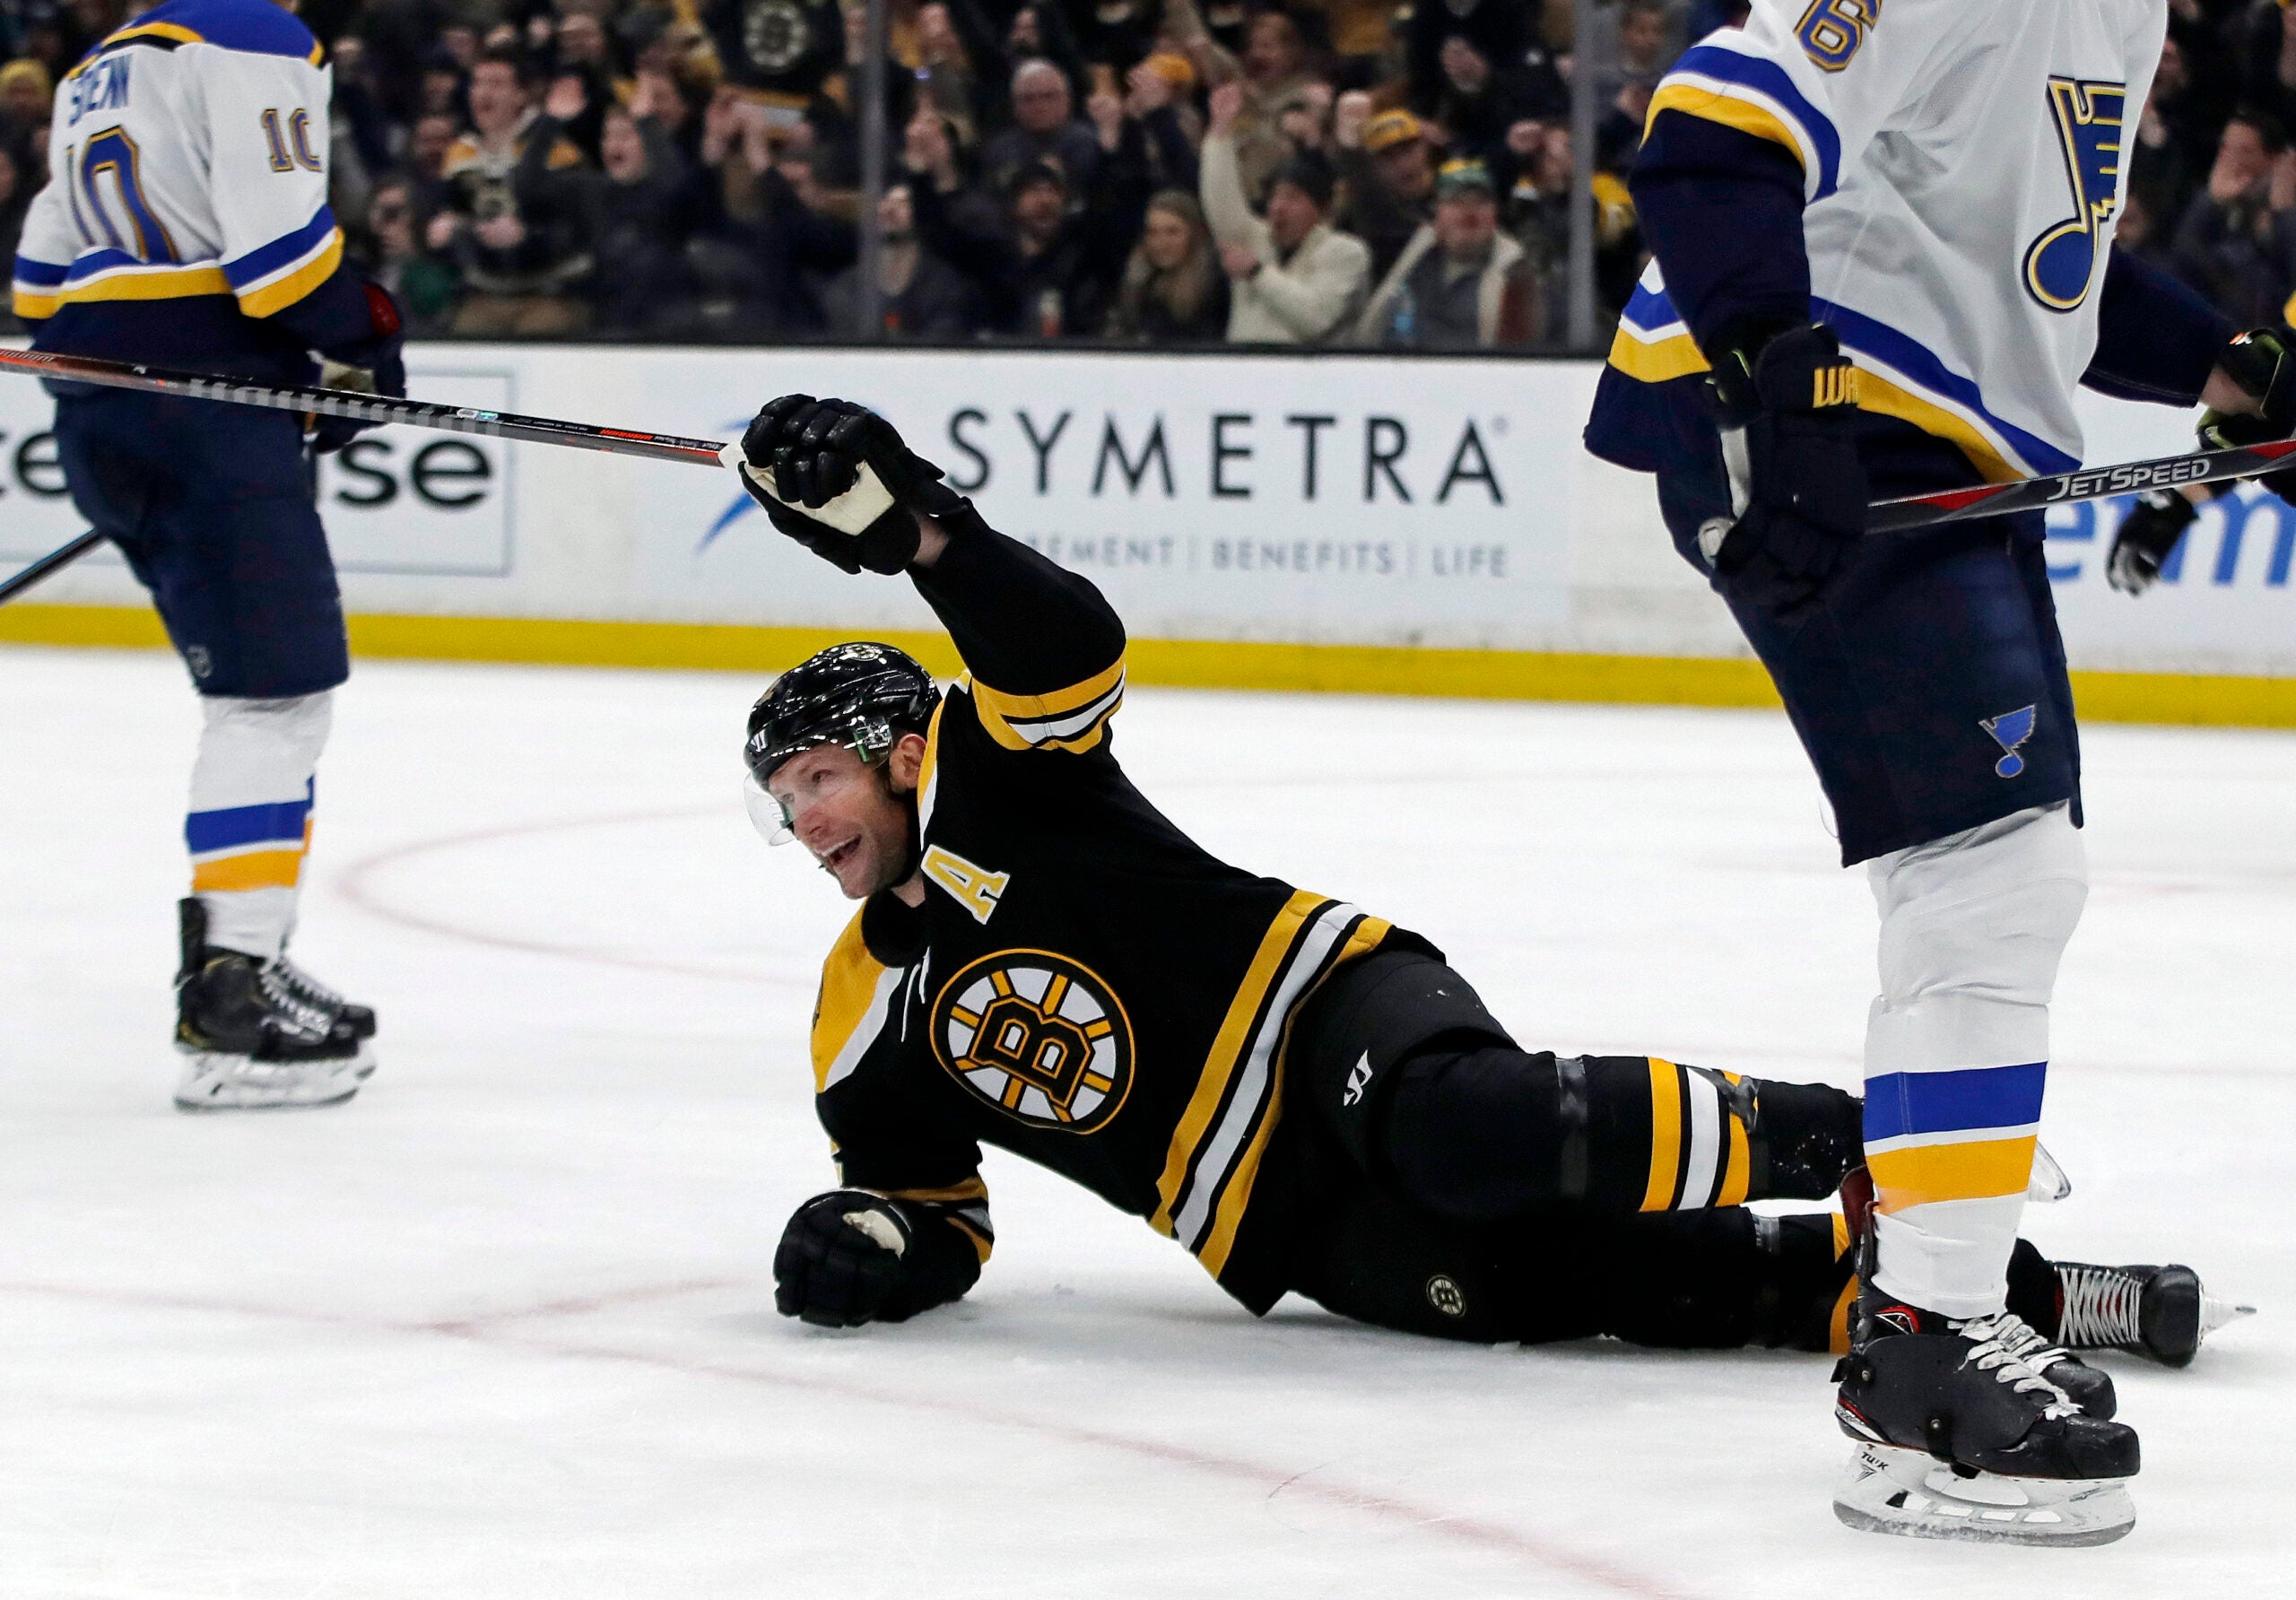 Sean Kuraly has a history of scoring clutch goals for the Bruins